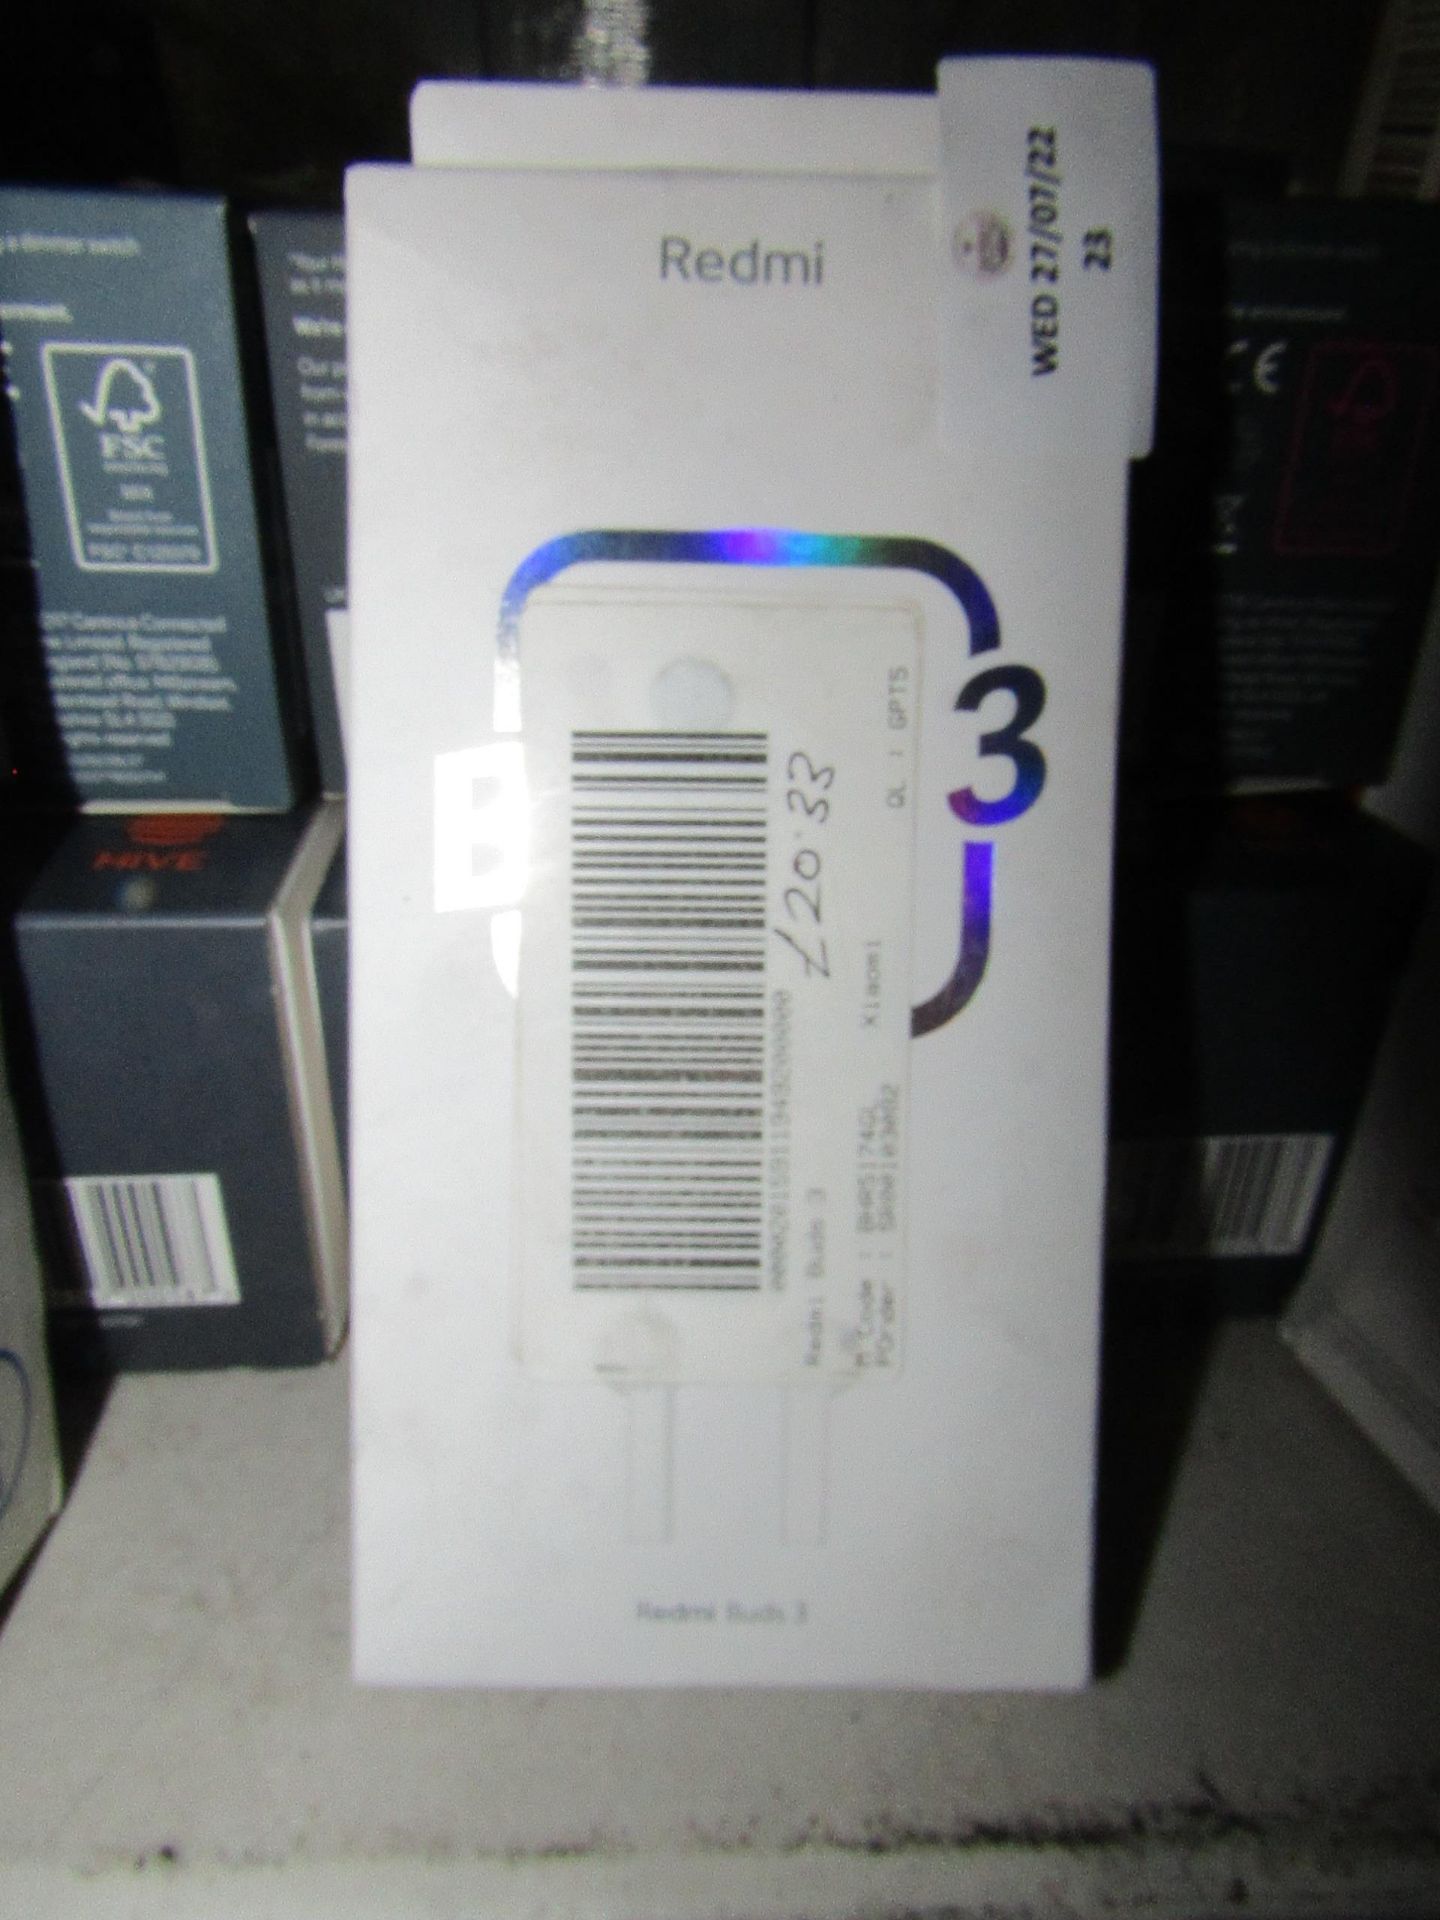 Redmi - Wireless Buds 3 - White - Untested & Boxed. RRP £37